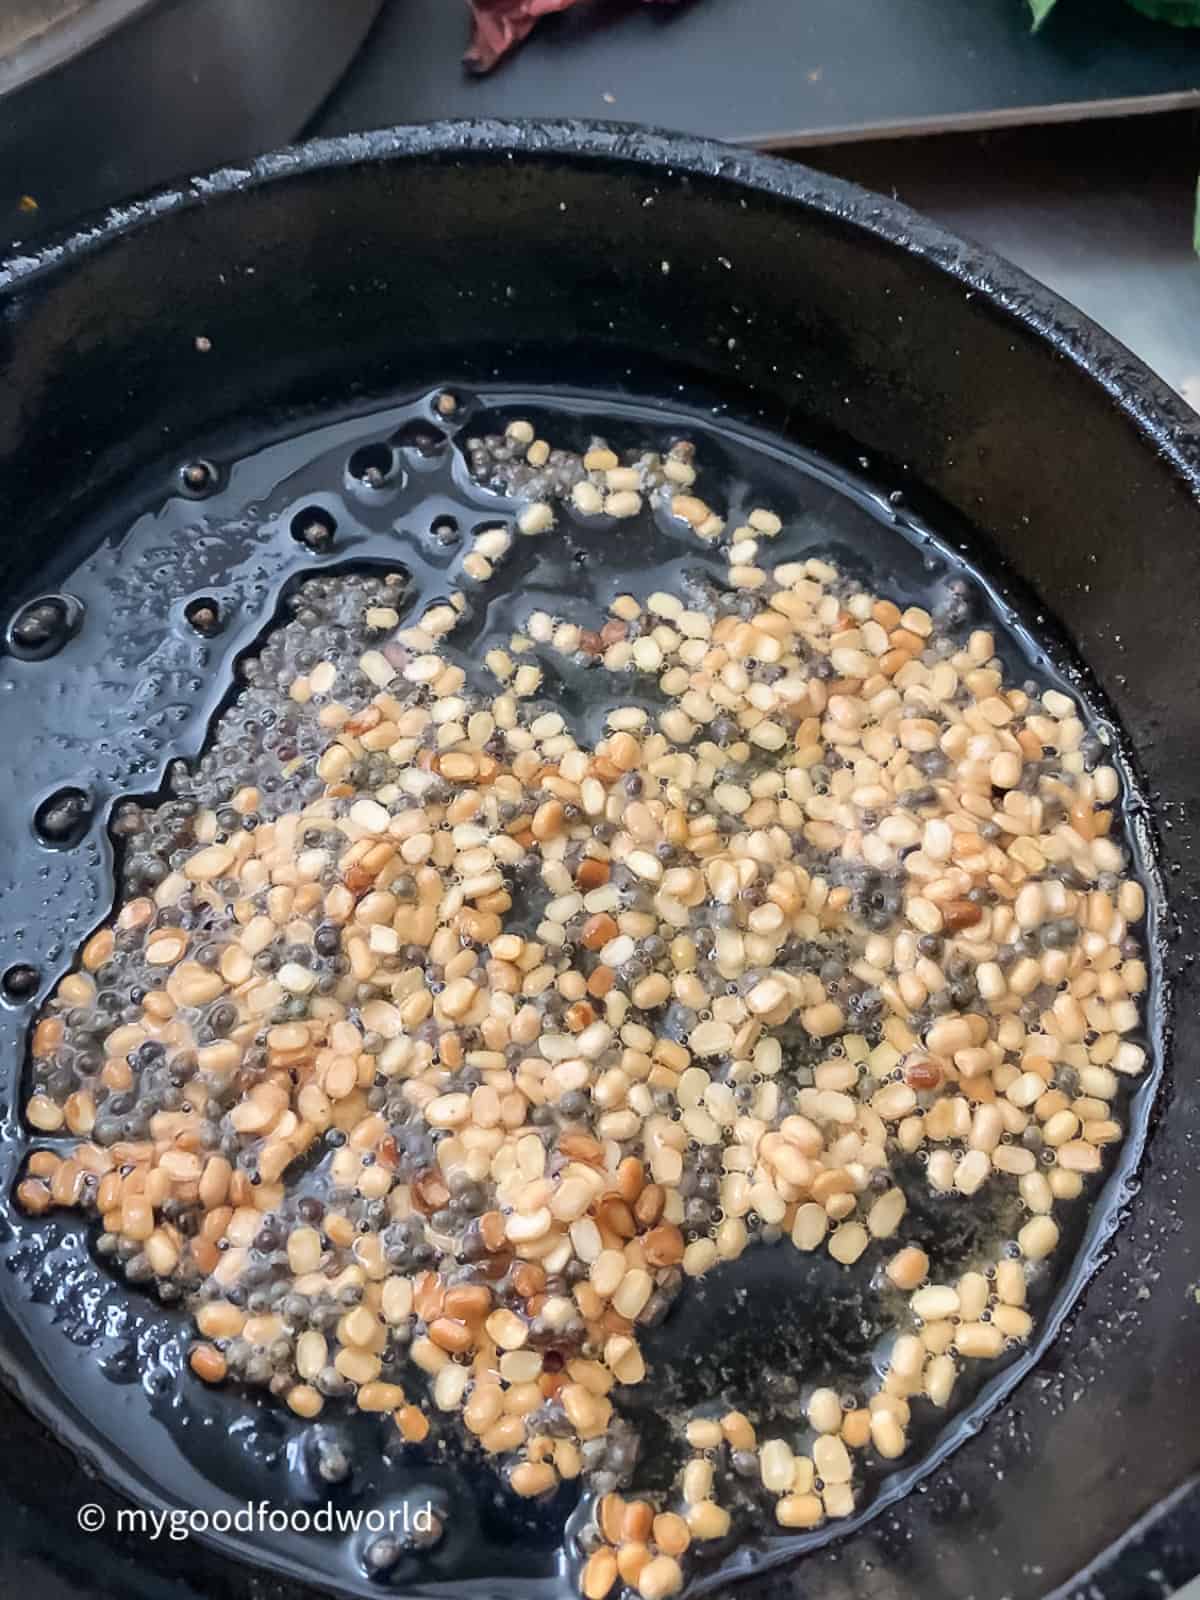 White lentils and mustard seeds fried in oil for coconut chutney.